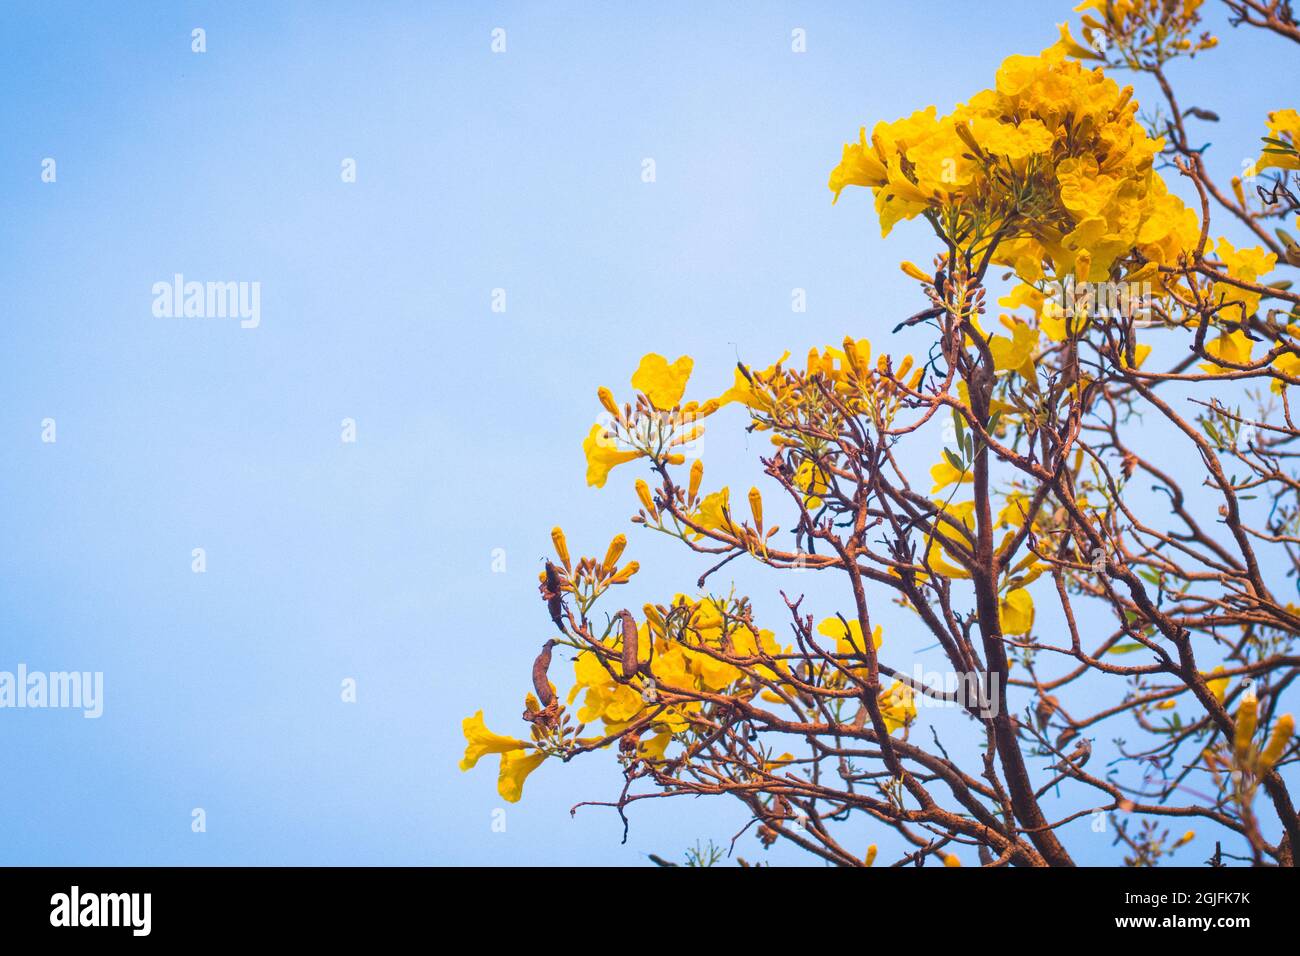 yellow flowers blossom in spring summer bluer sky background lively season holday concept idea Stock Photo